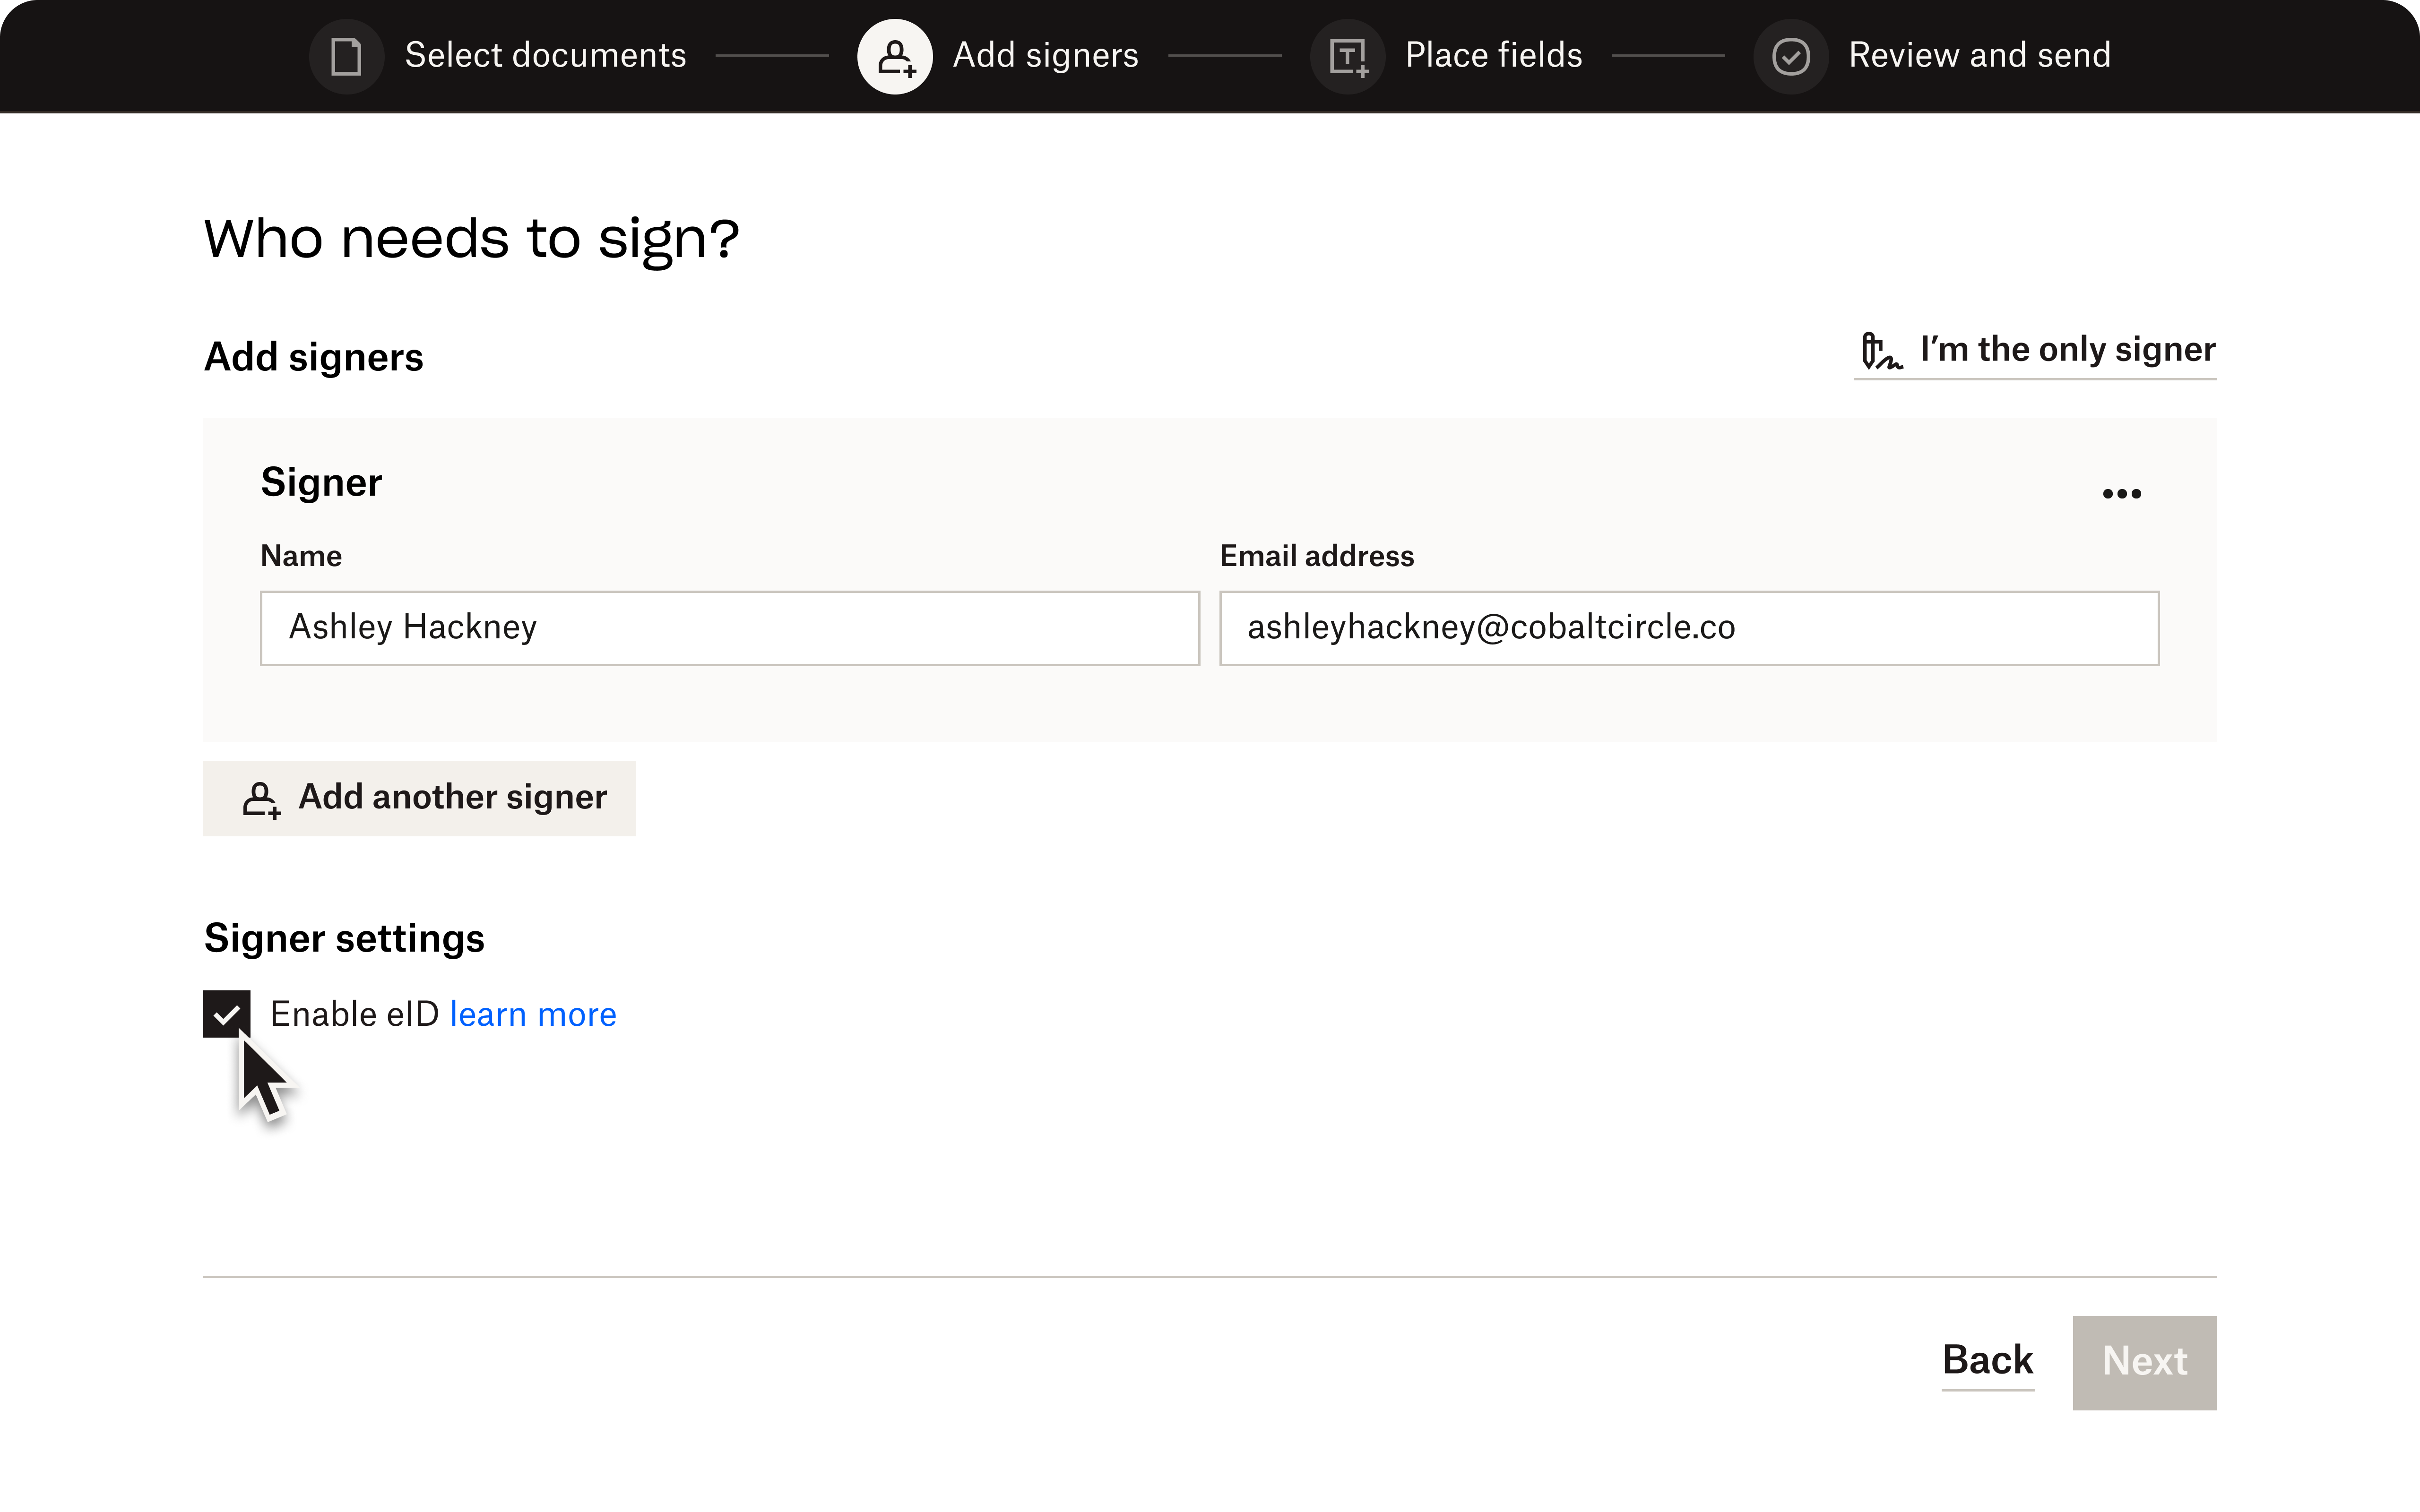 The second step of Dropbox Sign, where a user can add signers and enable eID